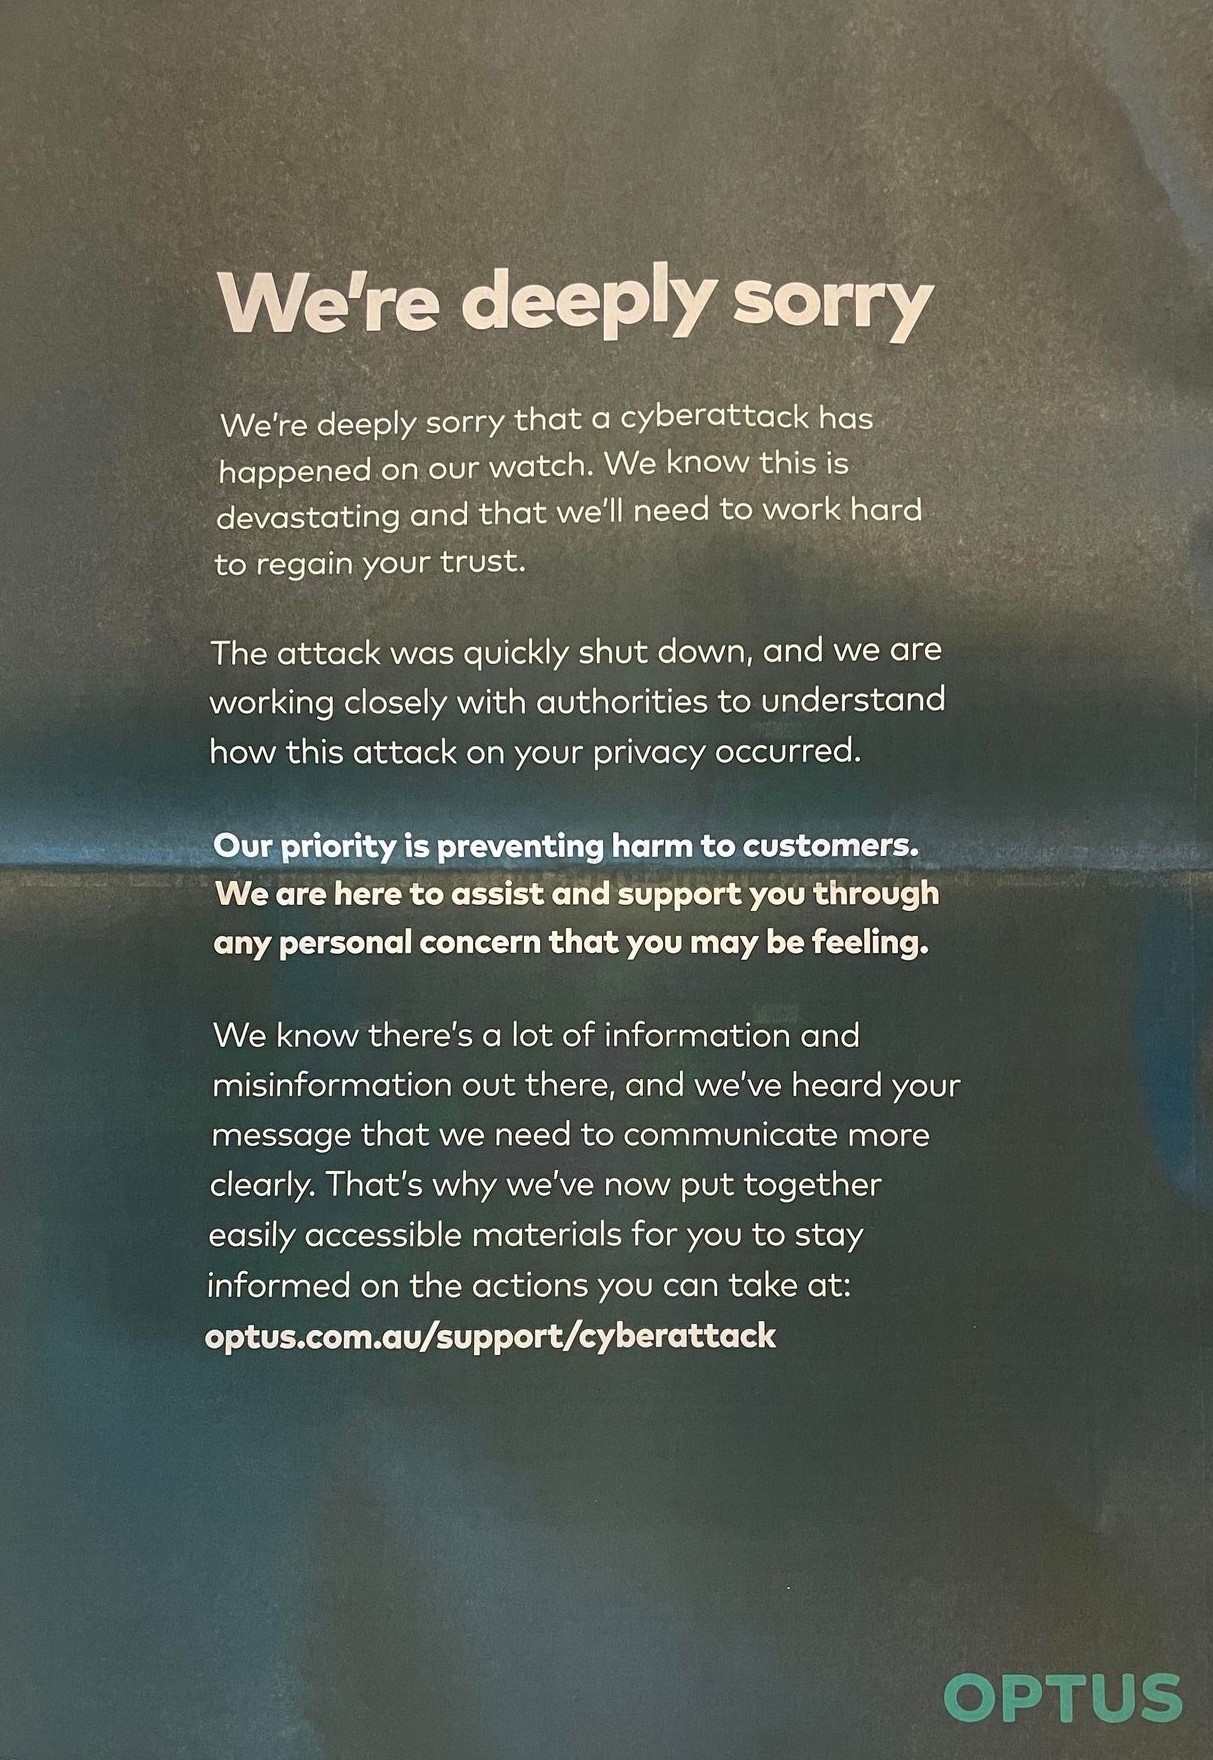 Optus's full page ad, which says "We're deeply sorry that a cyberattack has  happened on our watch".